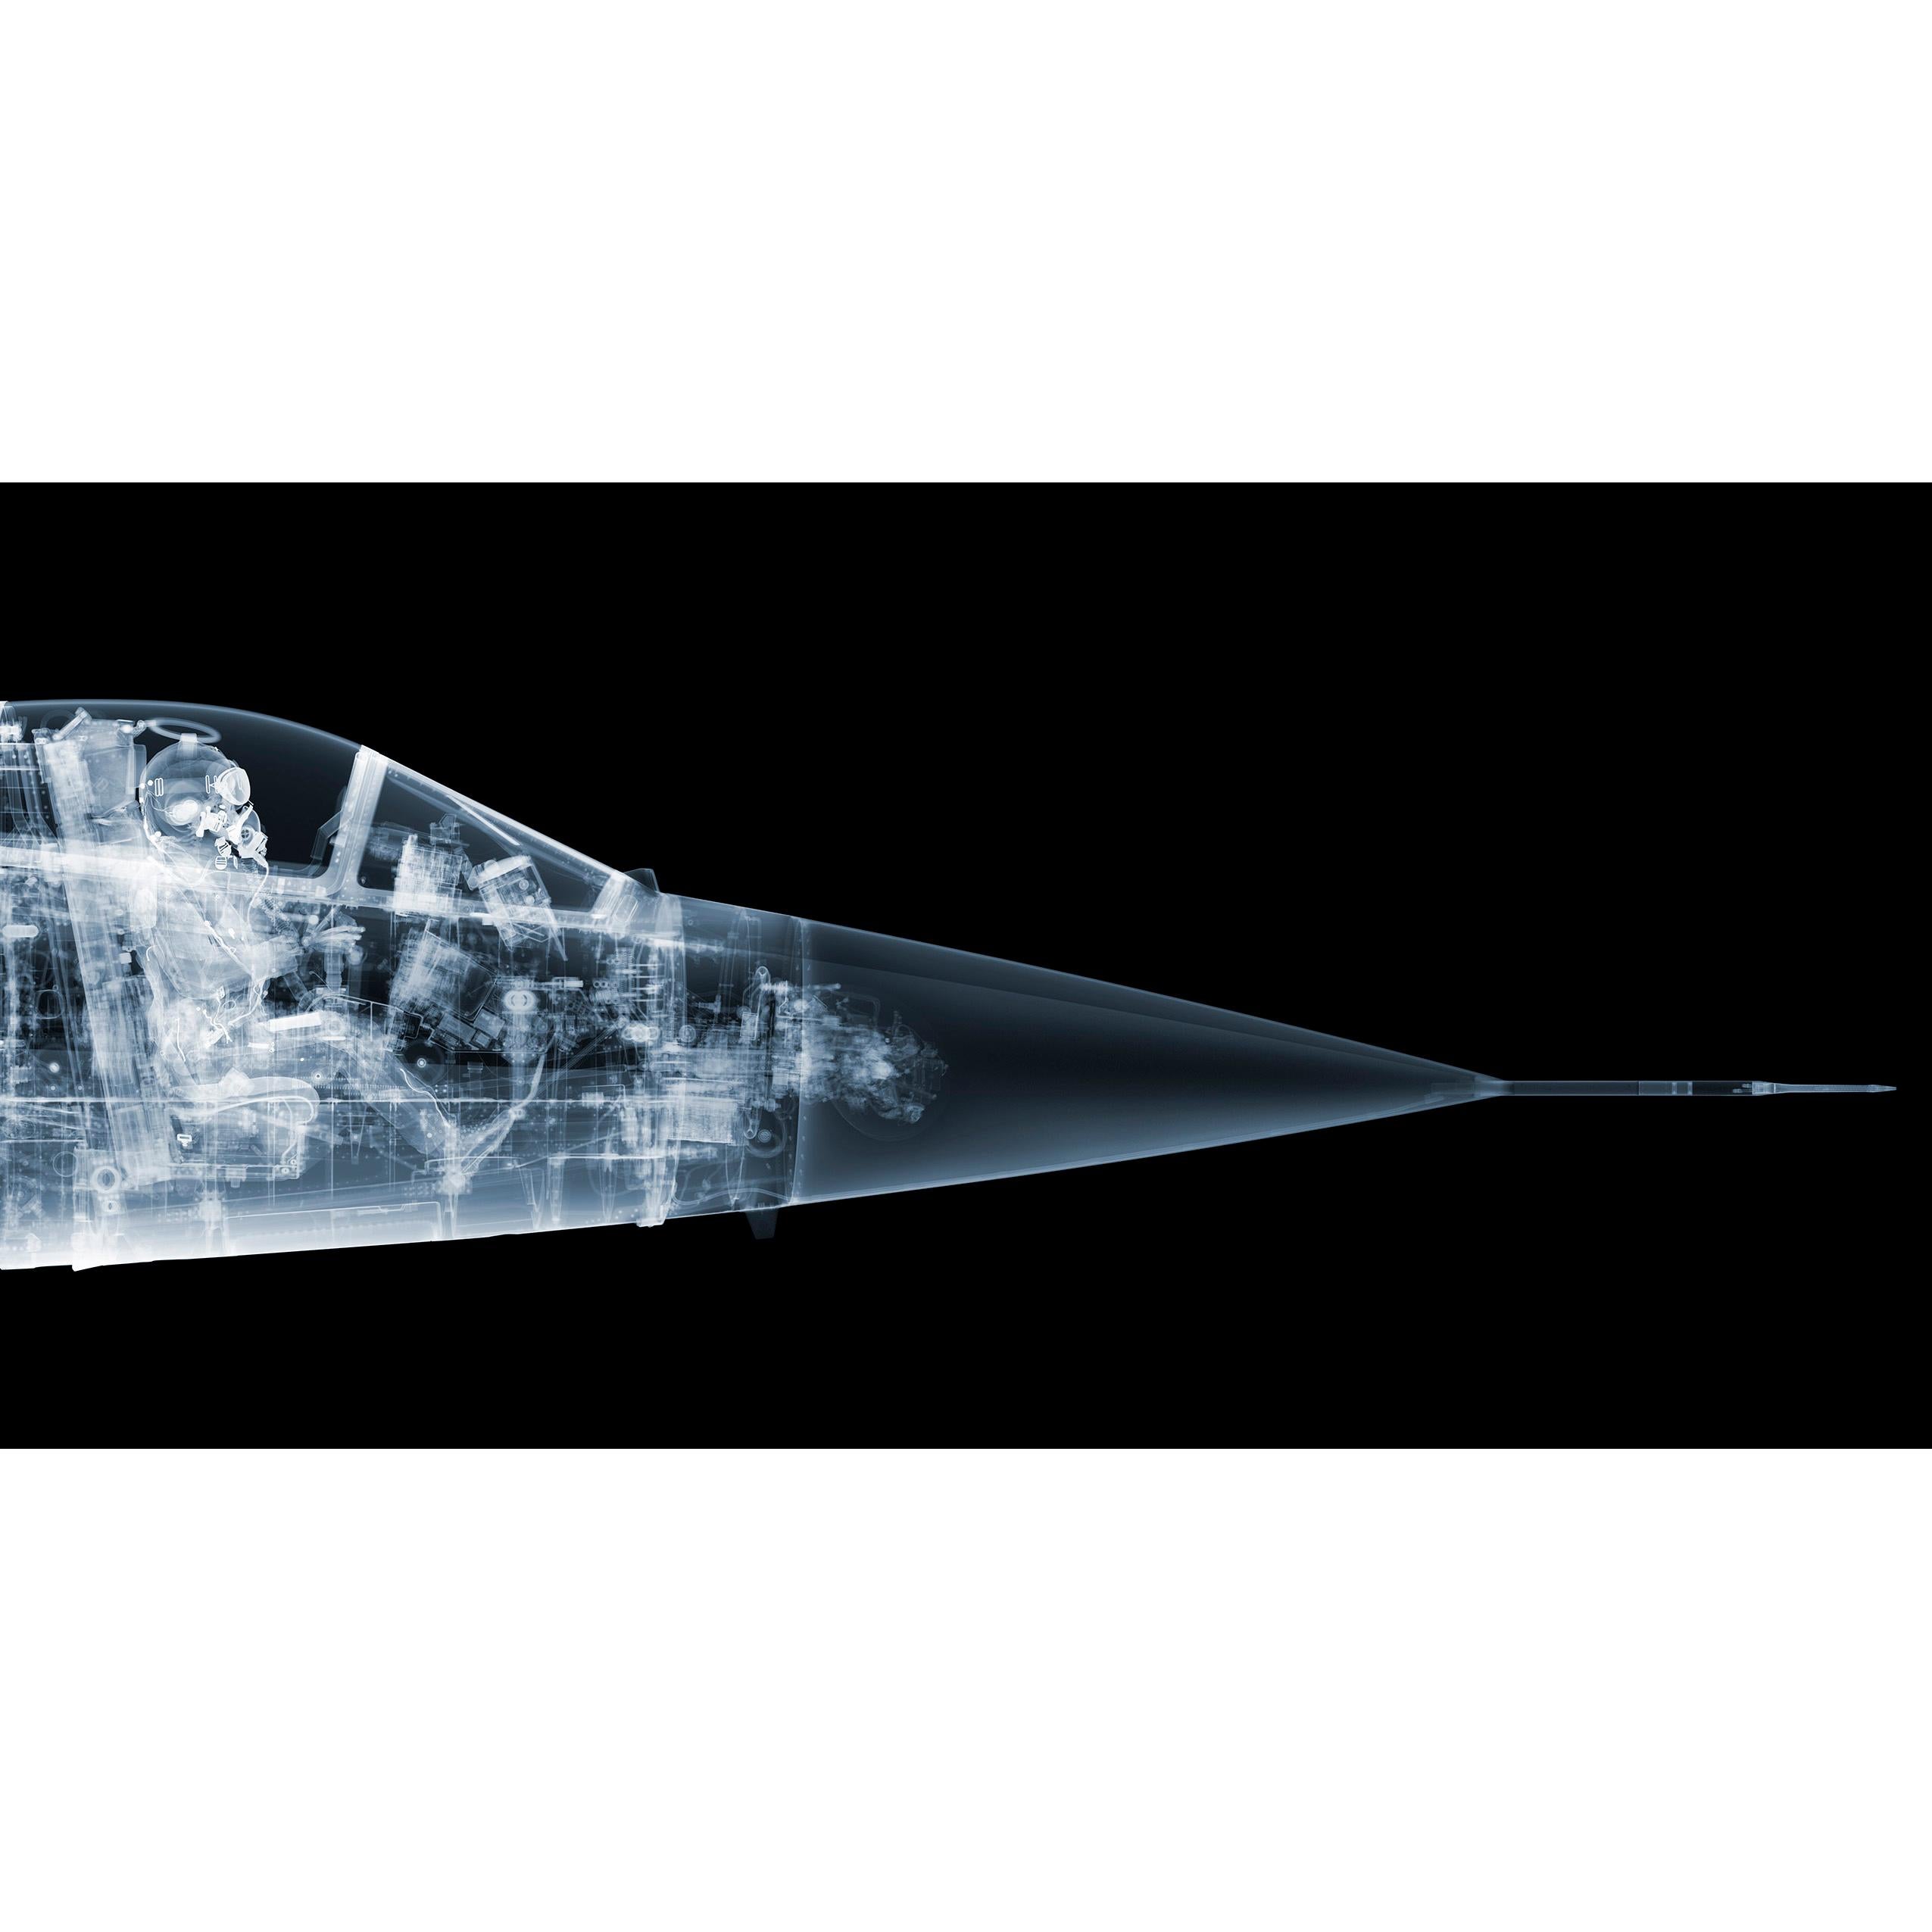 Nick Veasey Abstract Photograph - F-104 Starfighter, October 2016 - Ed/25